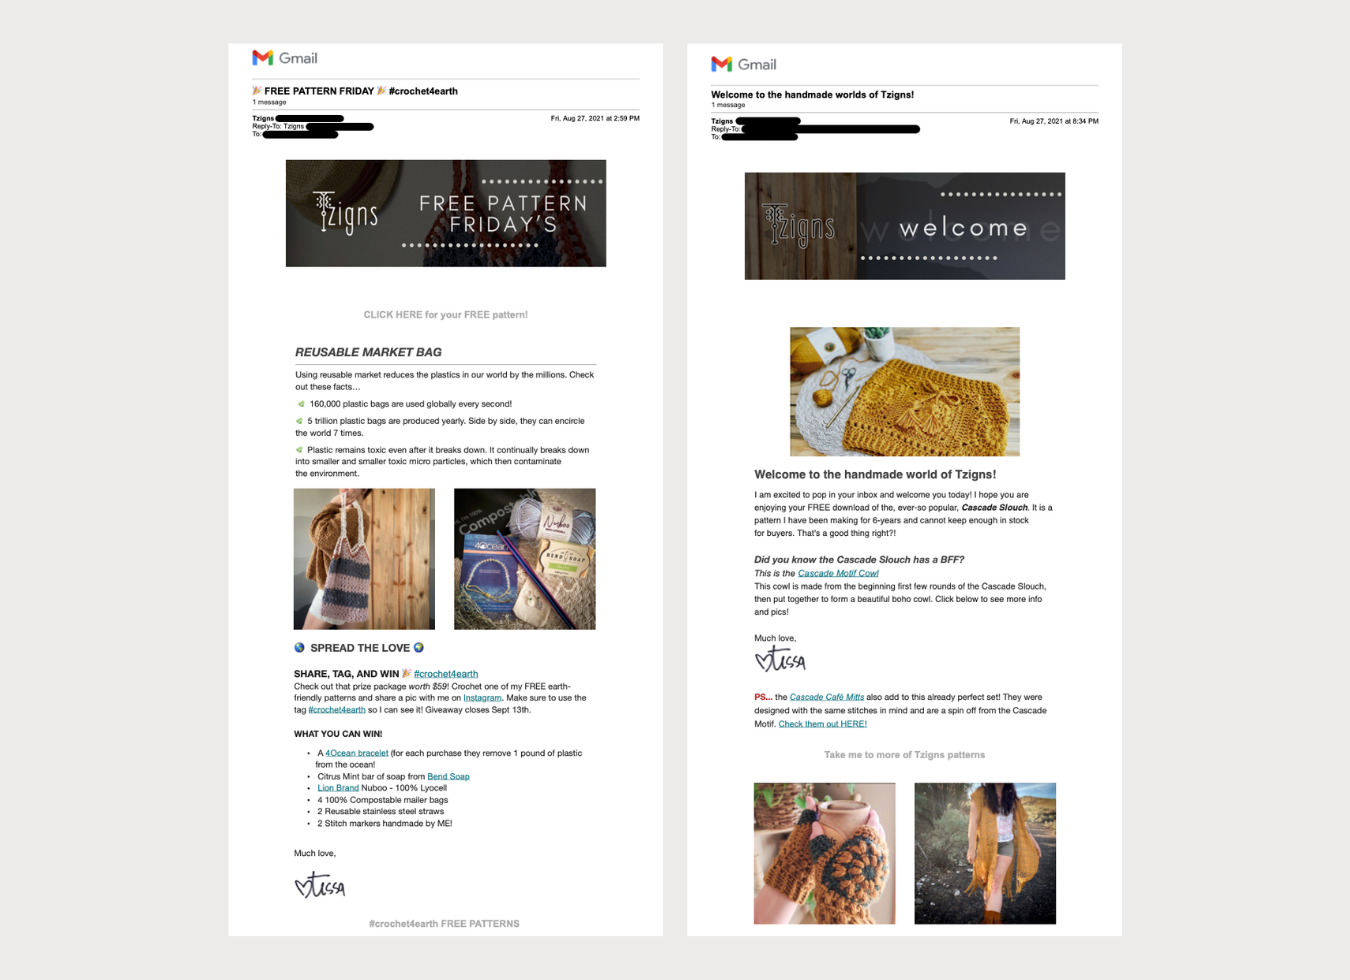 The welcome email from Designs by Tessa after you download one of her images. It includes text about her reusable market bag, ways to spread the love, and images of her products.